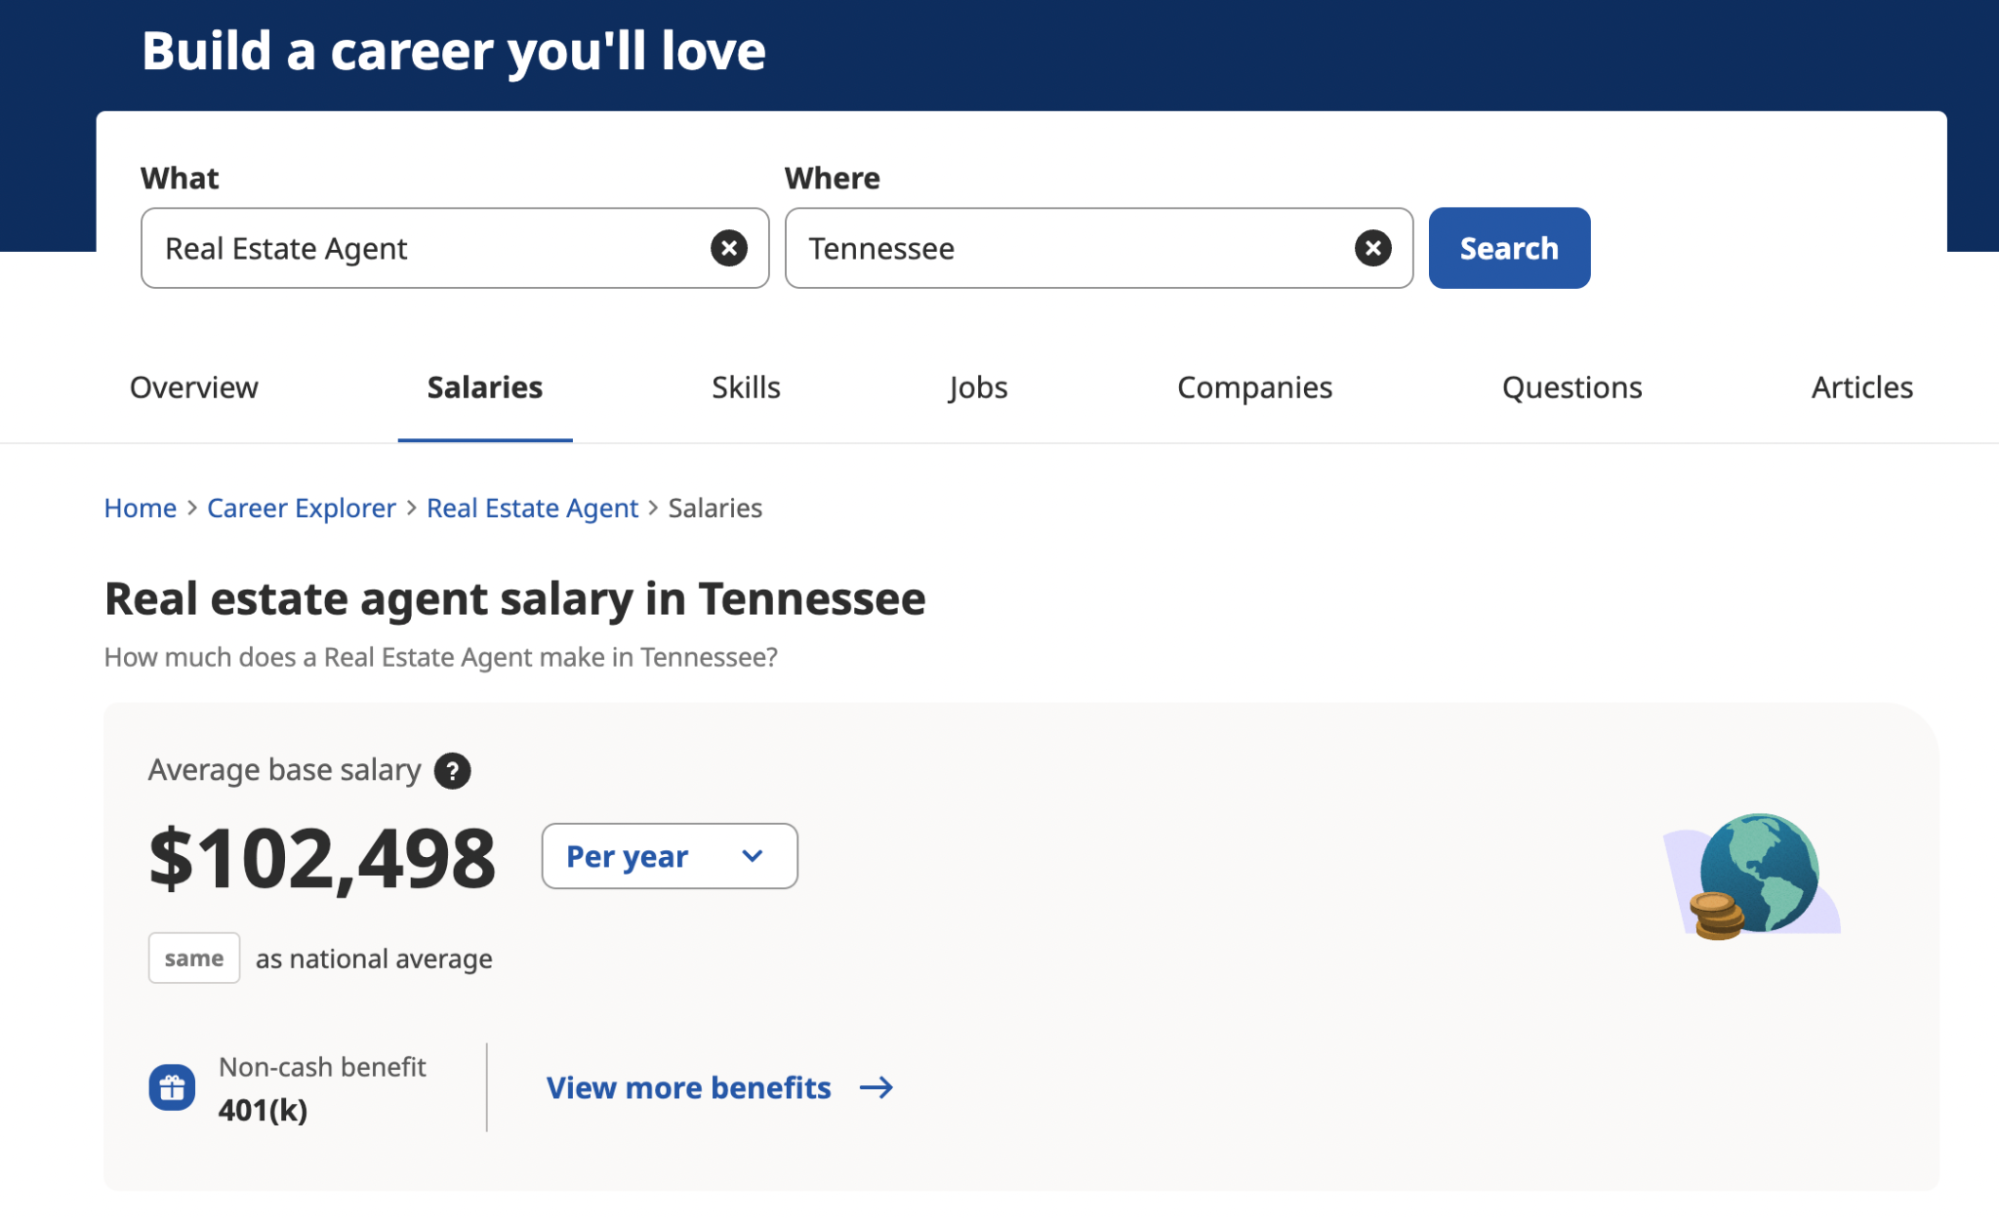 Salary information for real estate agents in Tennessee.